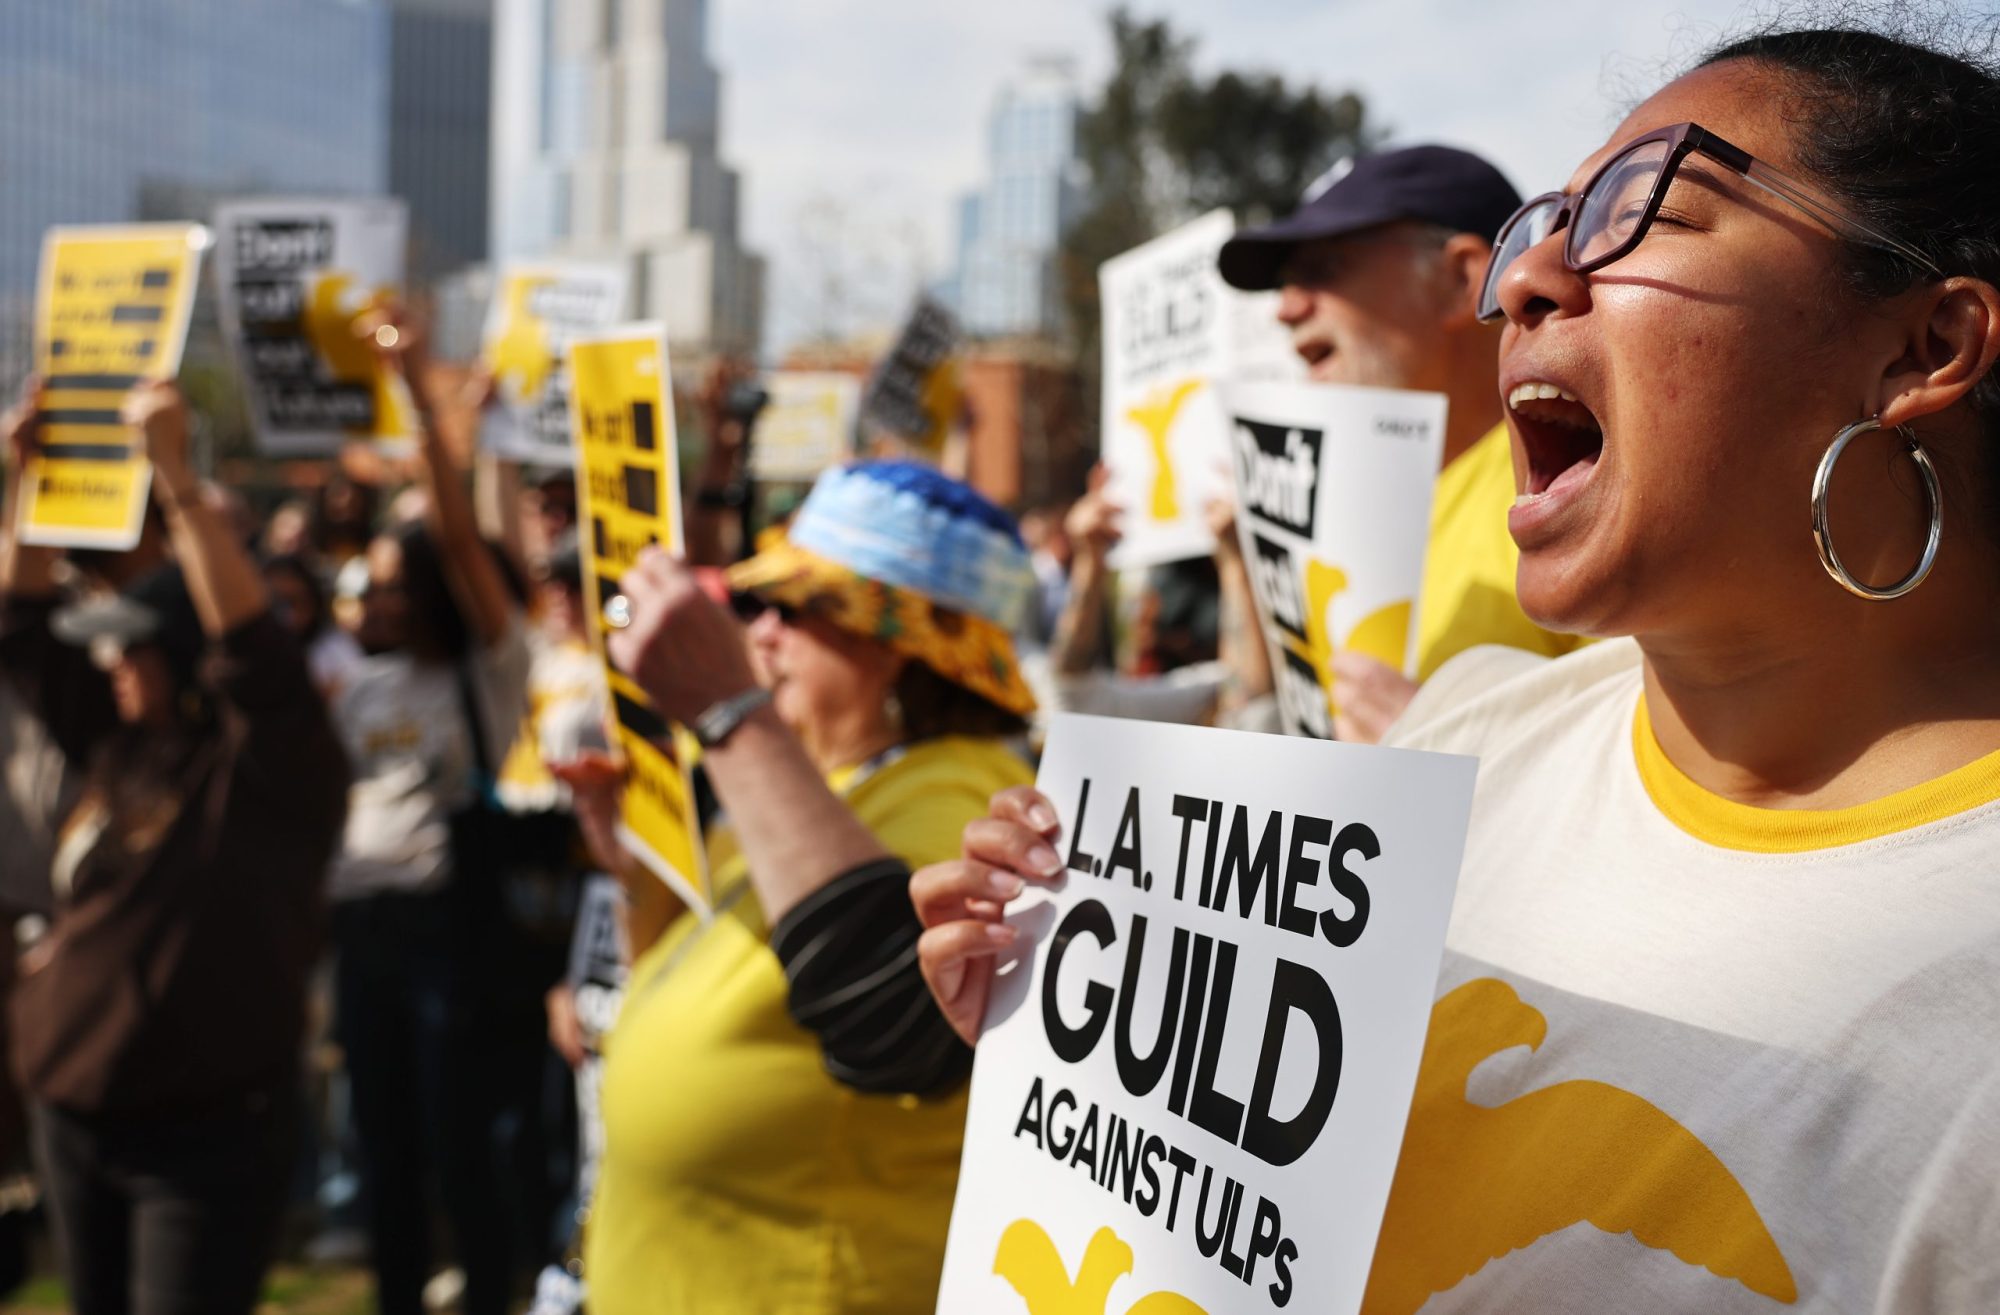 Los Angeles Times Guild members rally outside City Hall against ‘significant’ imminent layoffs at the Los Angeles Times newspaper during a one-day walkout on January 19, 2024 in Los Angeles, California. Photo by Mario Tama/Getty Images